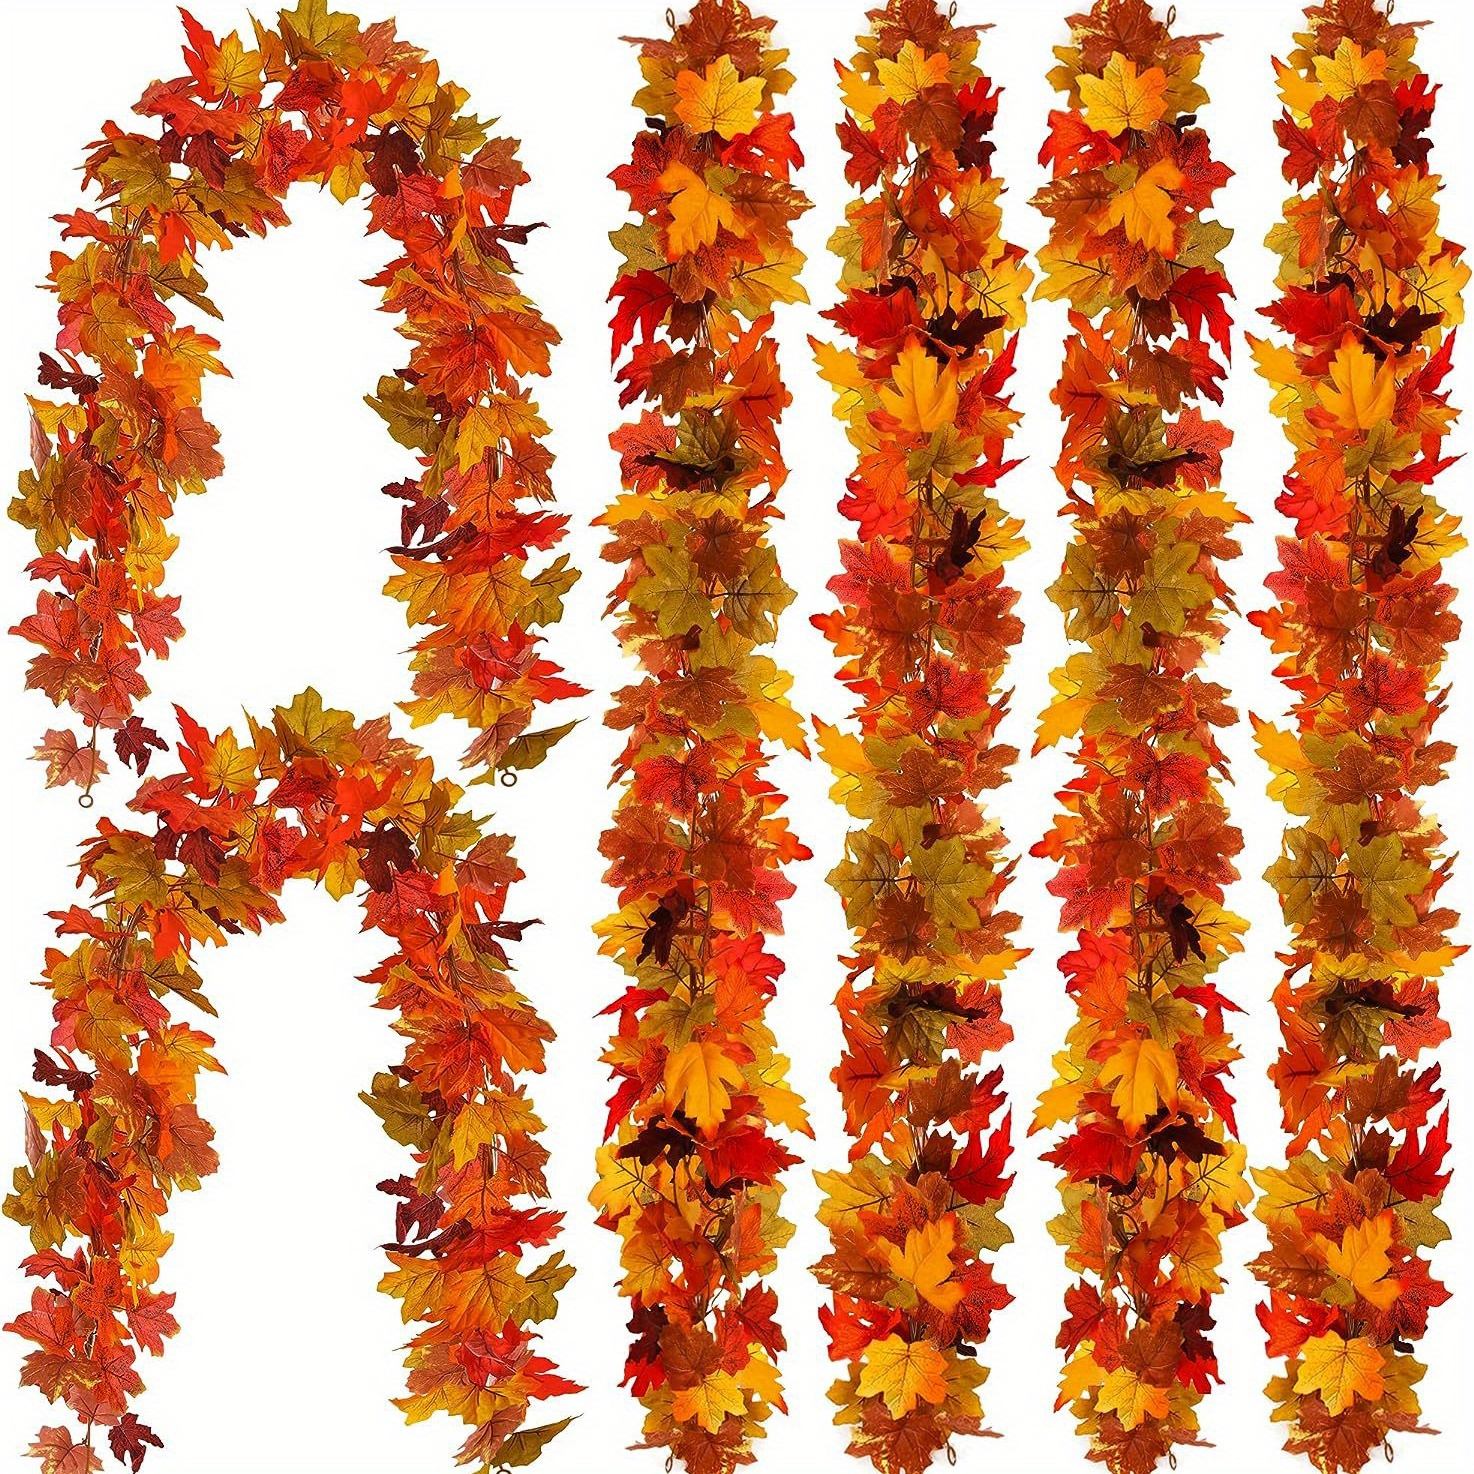 

1pc Autumn Maple Leaf Garland - Artificial Hanging Vine For Fall & Thanksgiving Decor, Outdoor Use Fall Decorations For Home Leaf Decor